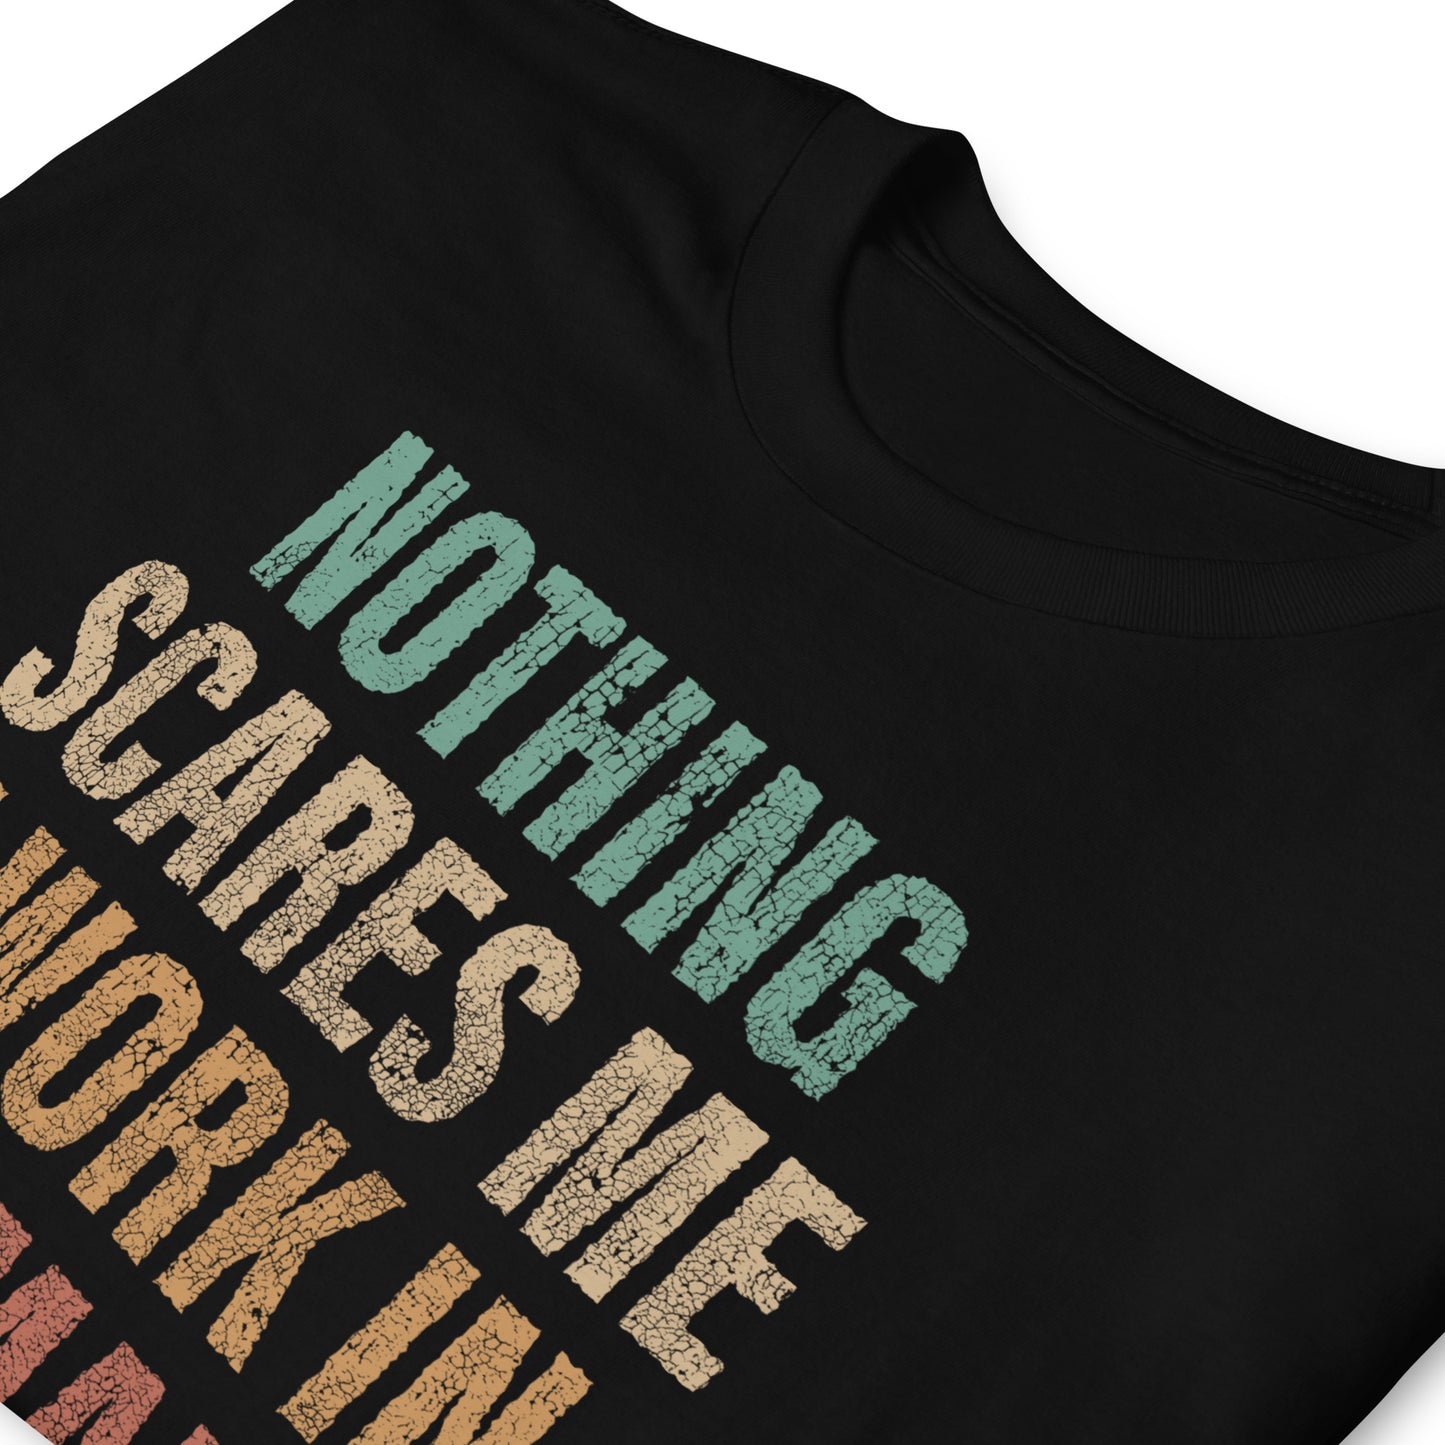 Unisex t-shirt: Nothing scares me, i work in human resources